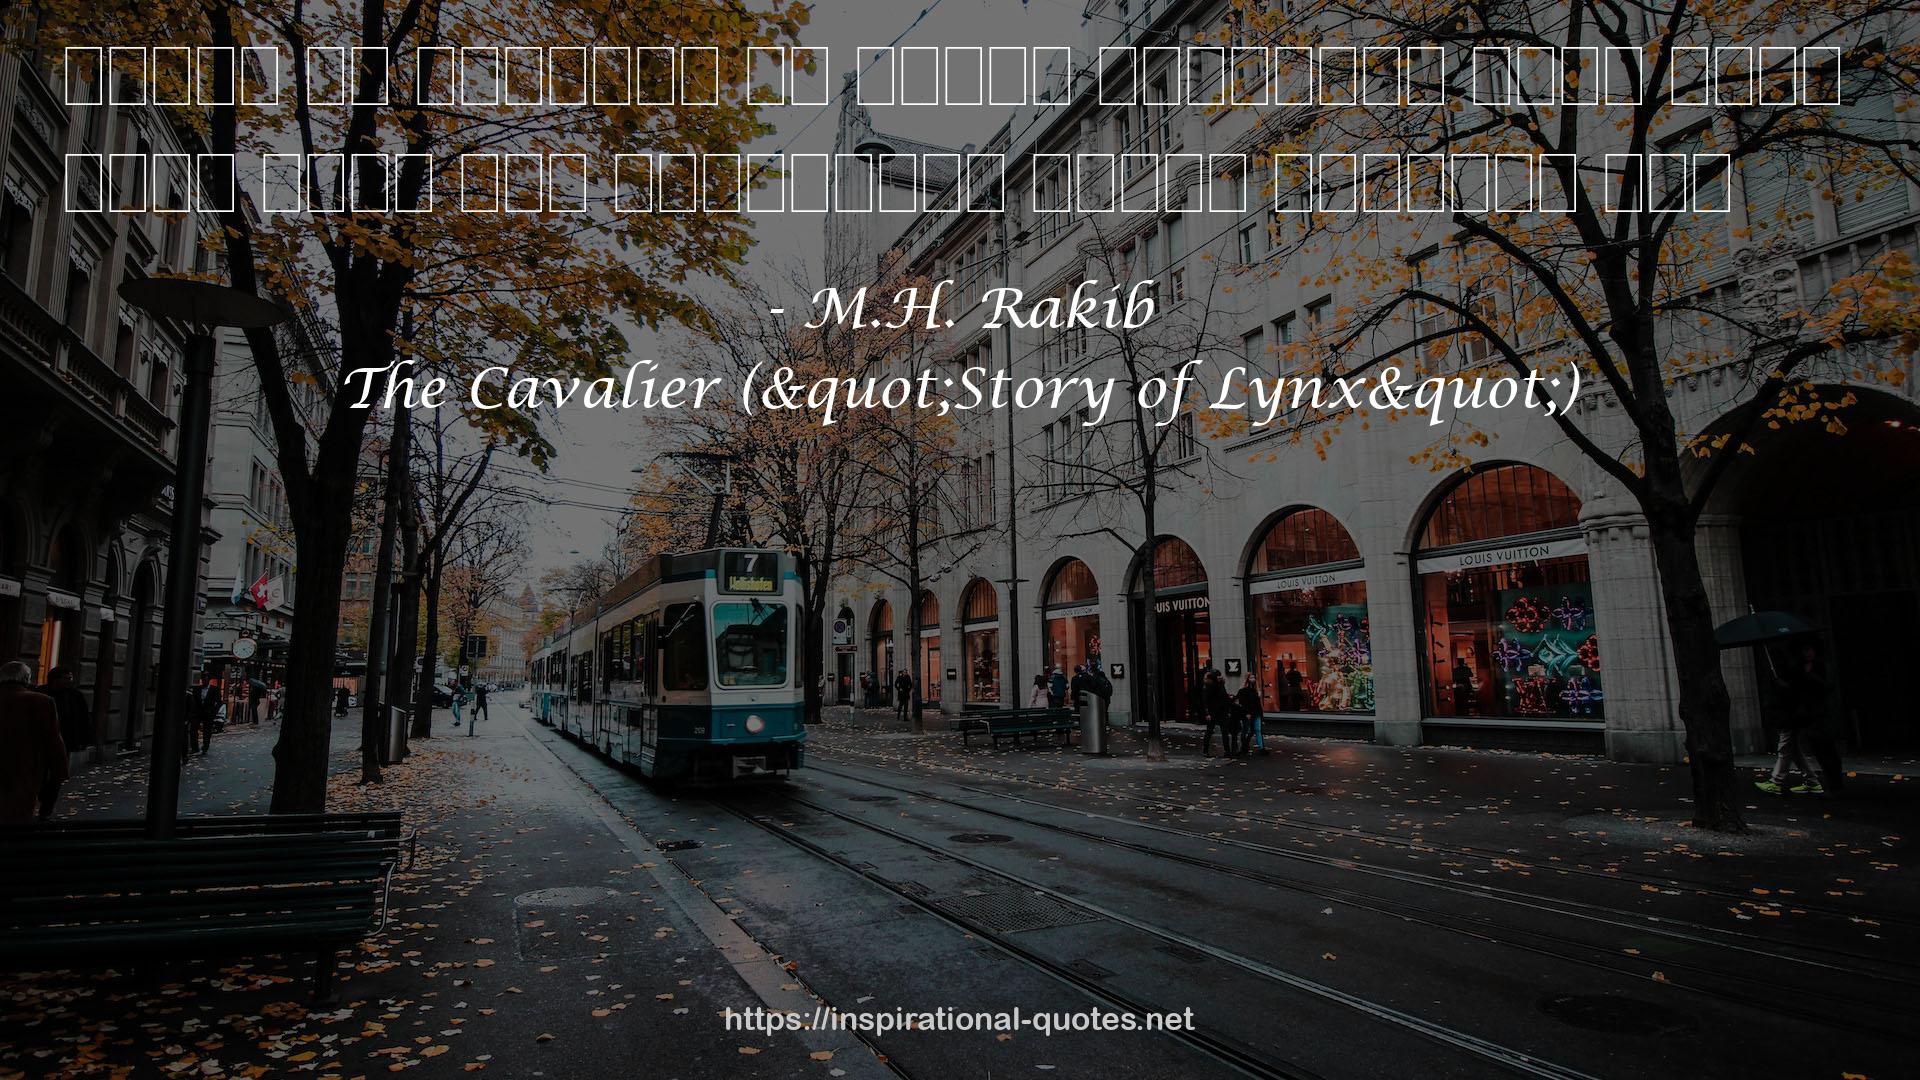 The Cavalier ("Story of Lynx") QUOTES